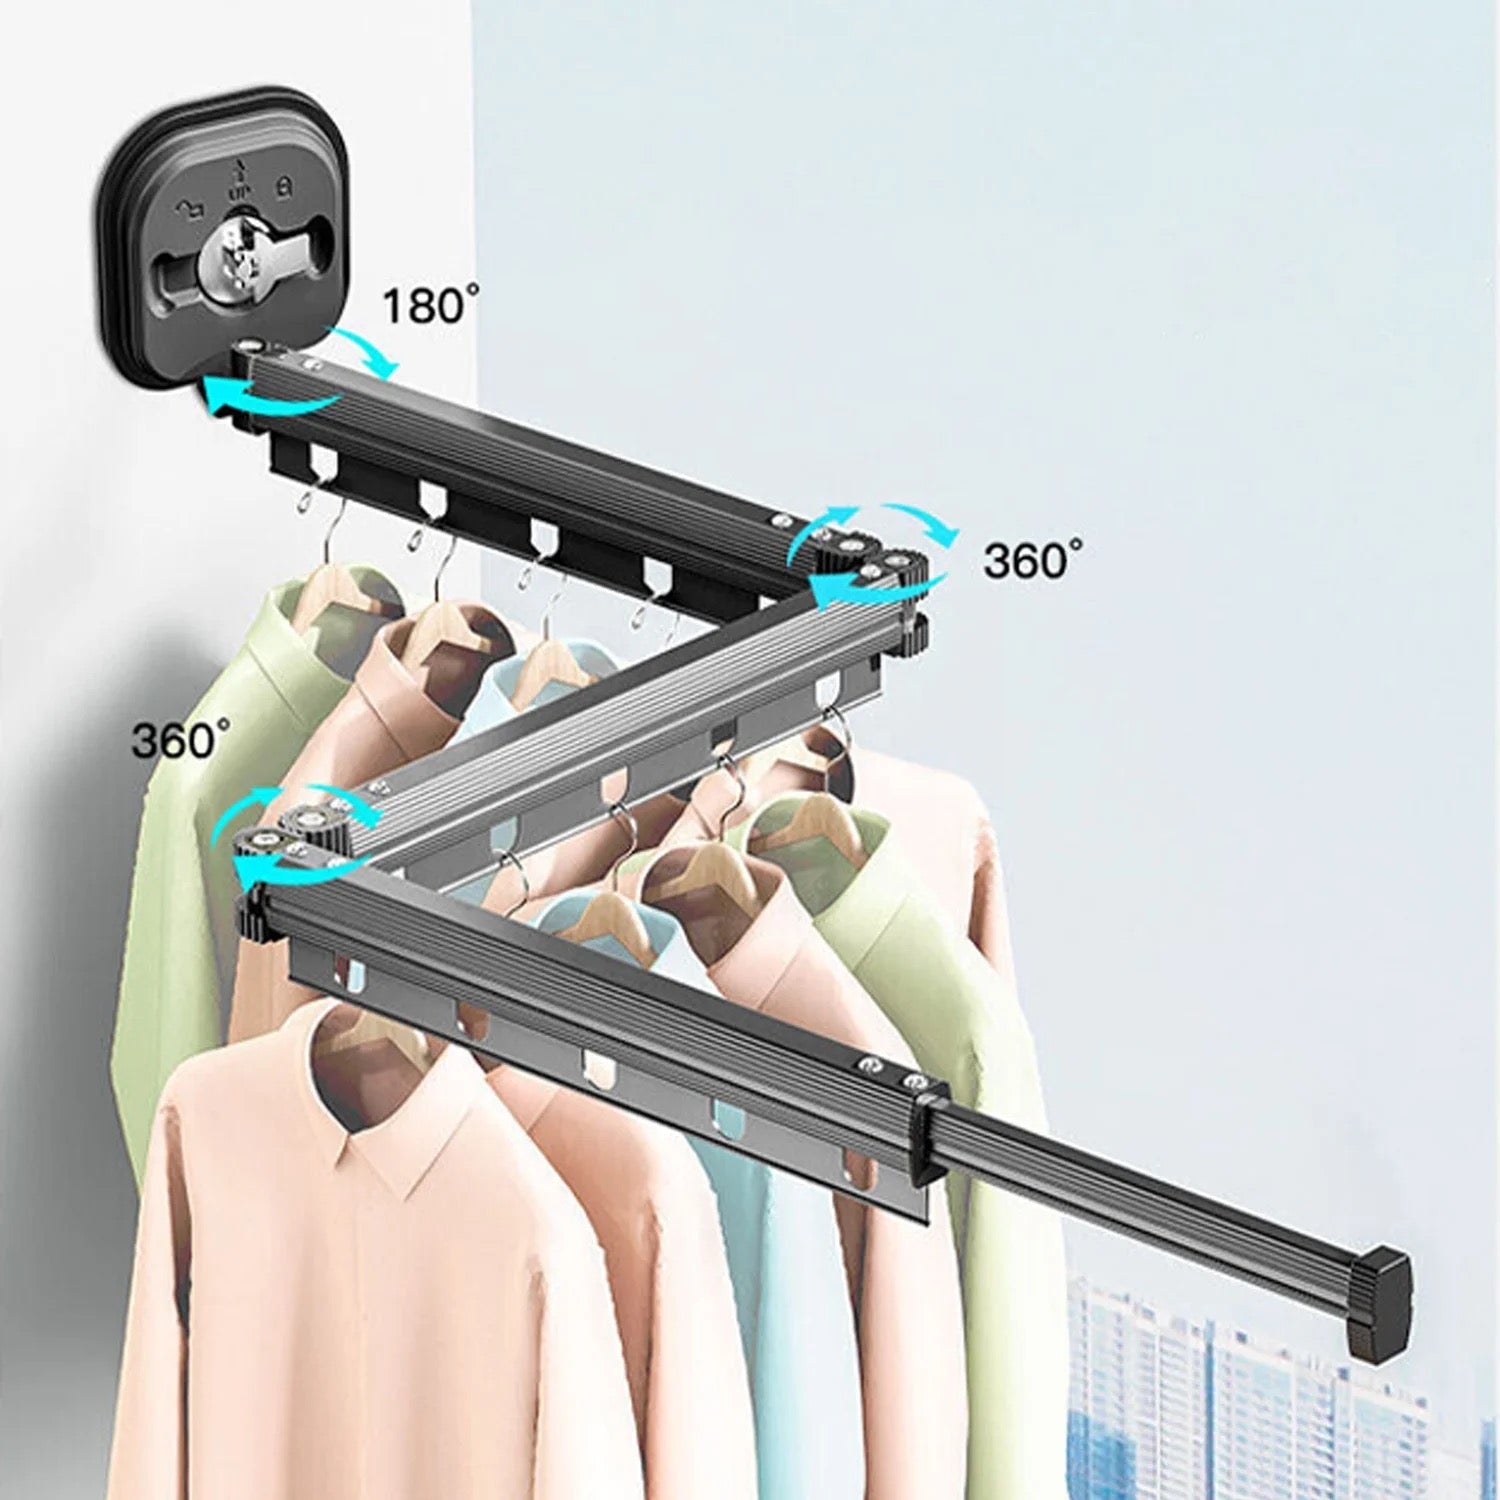 Image displaying the flexibility of Cup Clothes Drying Rack